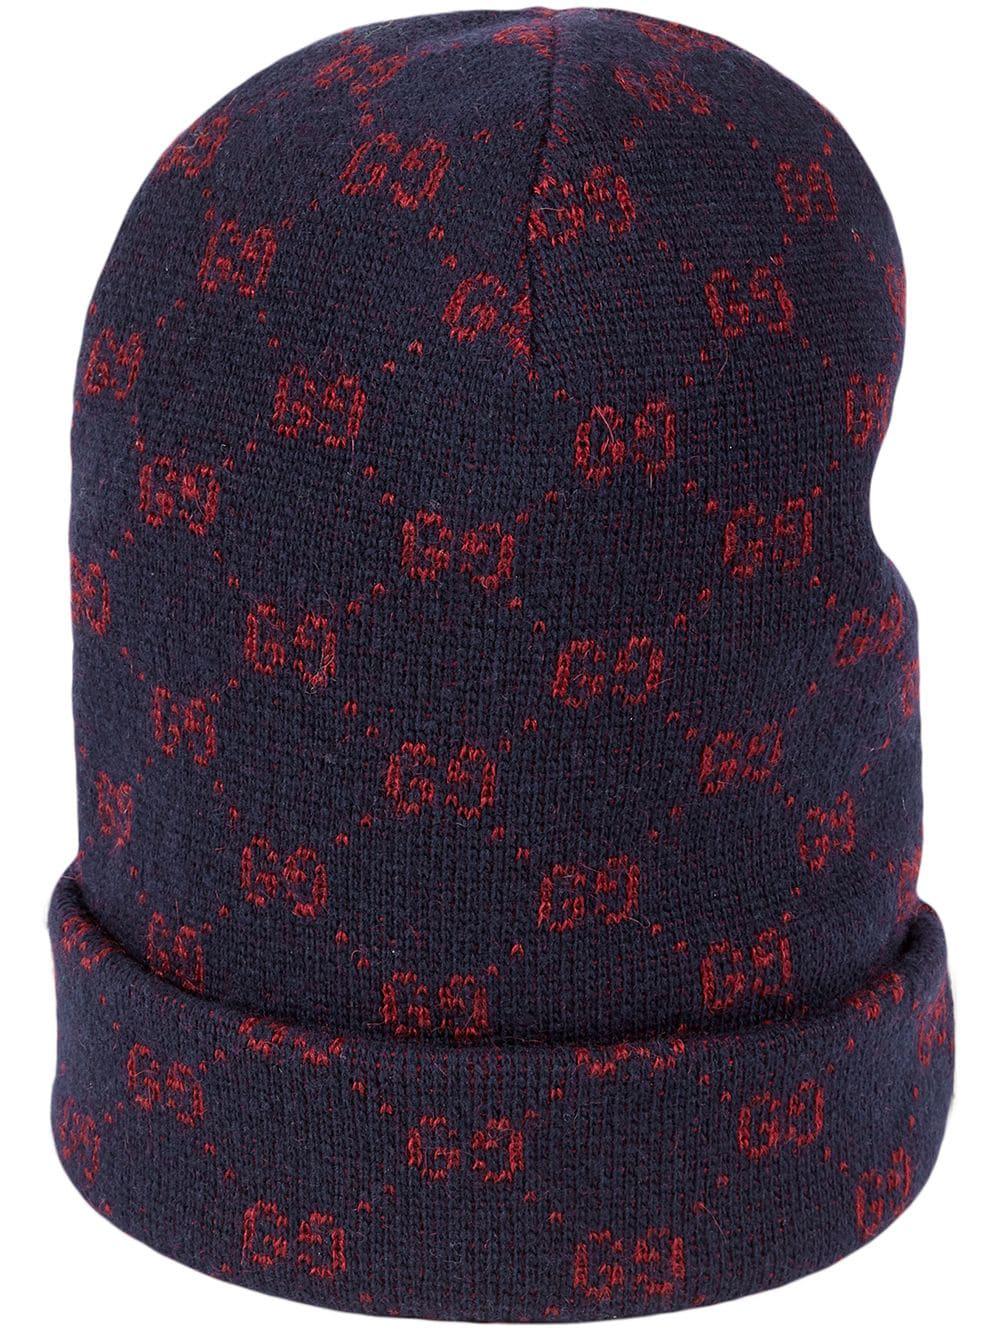 Gucci GG Alpaca Wool Hat in Blue for Men - Save 40% - Lyst